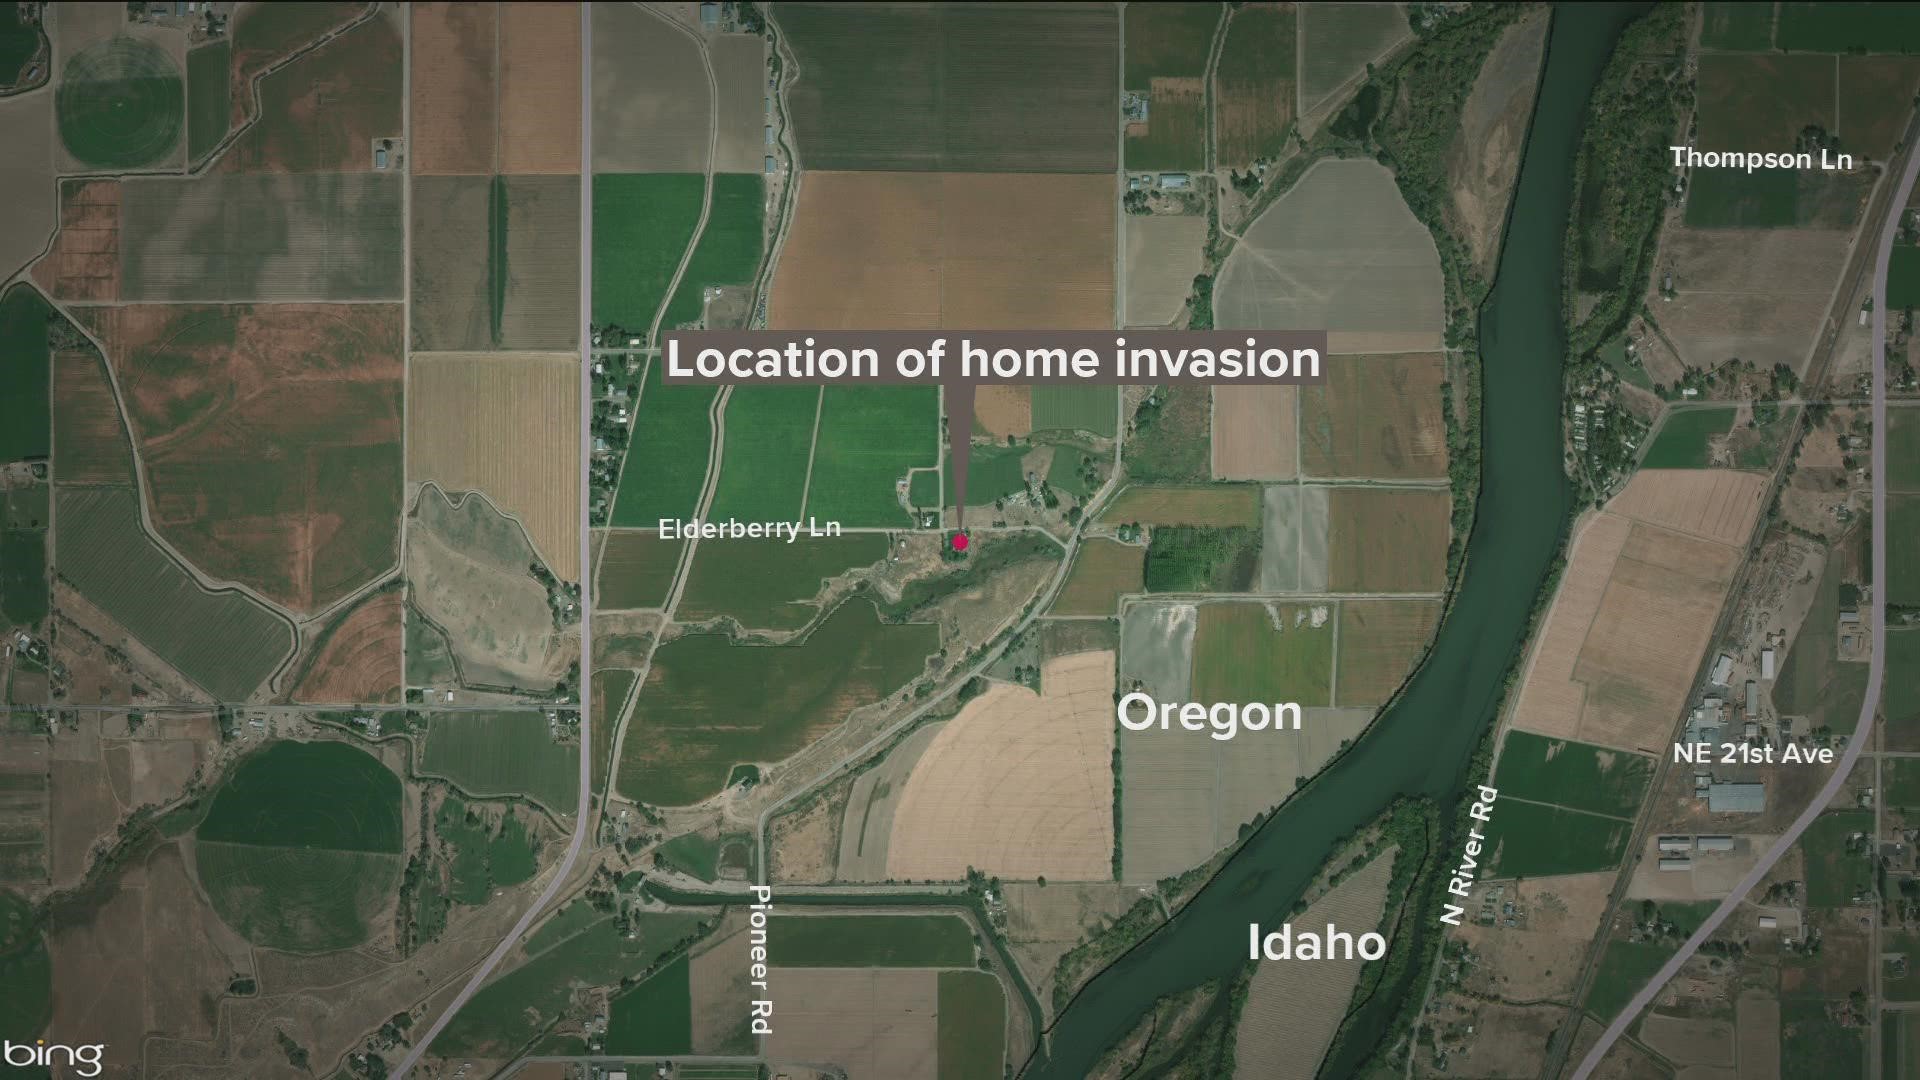 A man, with felony warrants in Idaho, entered a Malheur County home with a gun, demanding the residents make him a sandwich, according to the District Attorney.